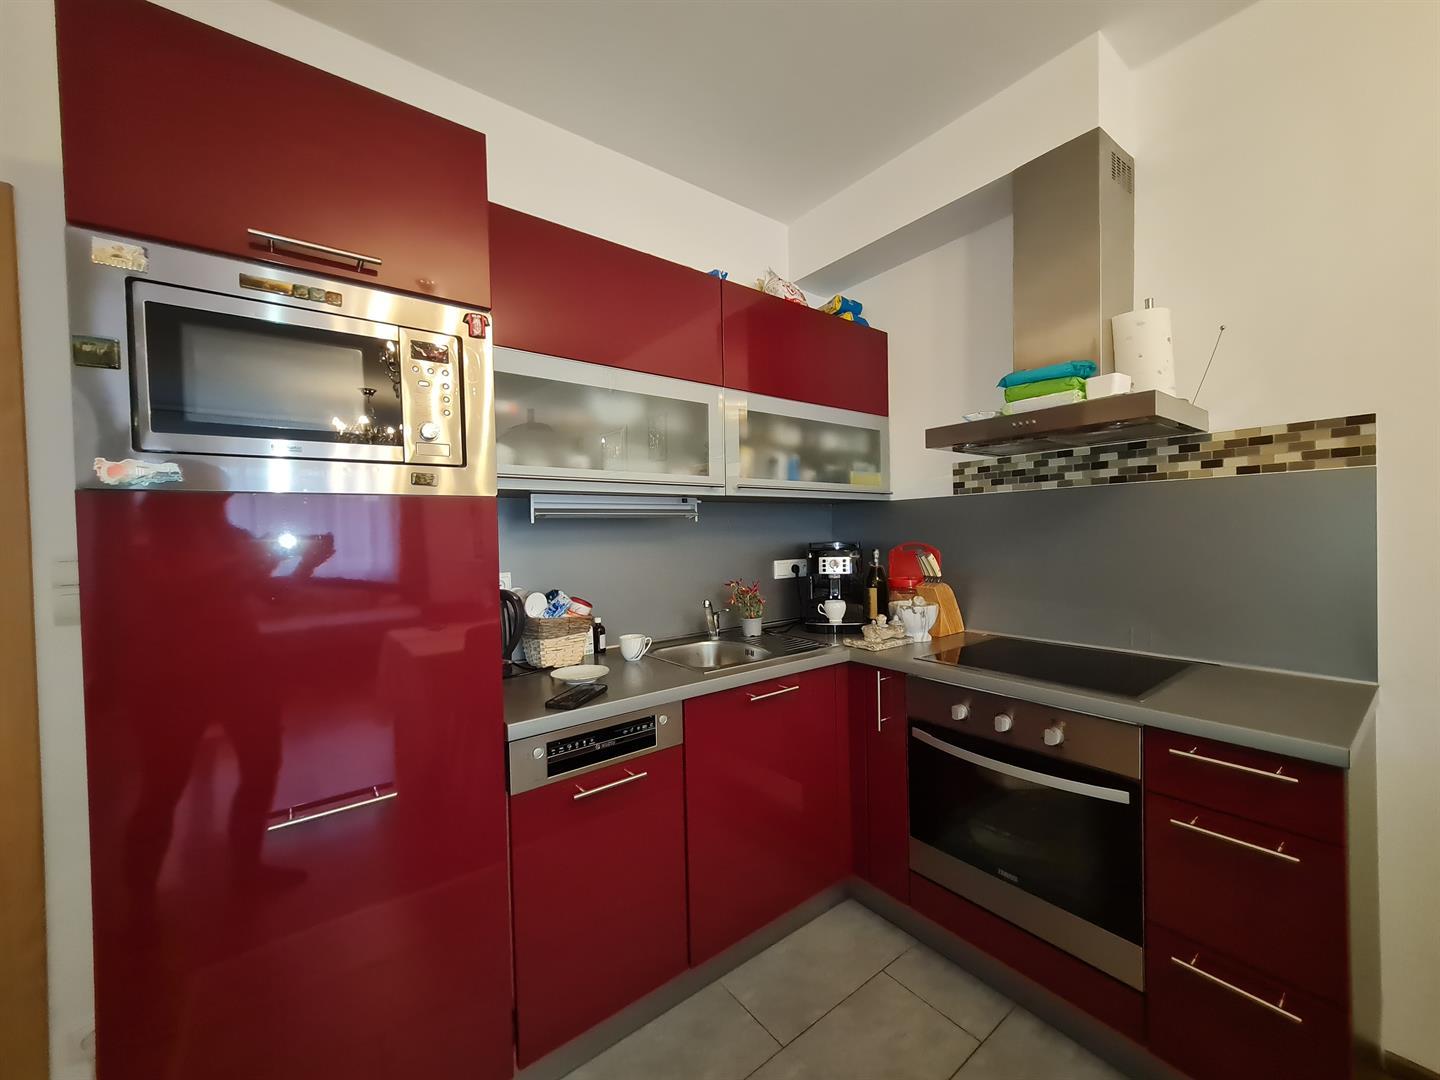 We exclusively offer for sale a spacious 2+kk 51.2 m2 apartment with a 4.3 m2 balcony a Střížkov